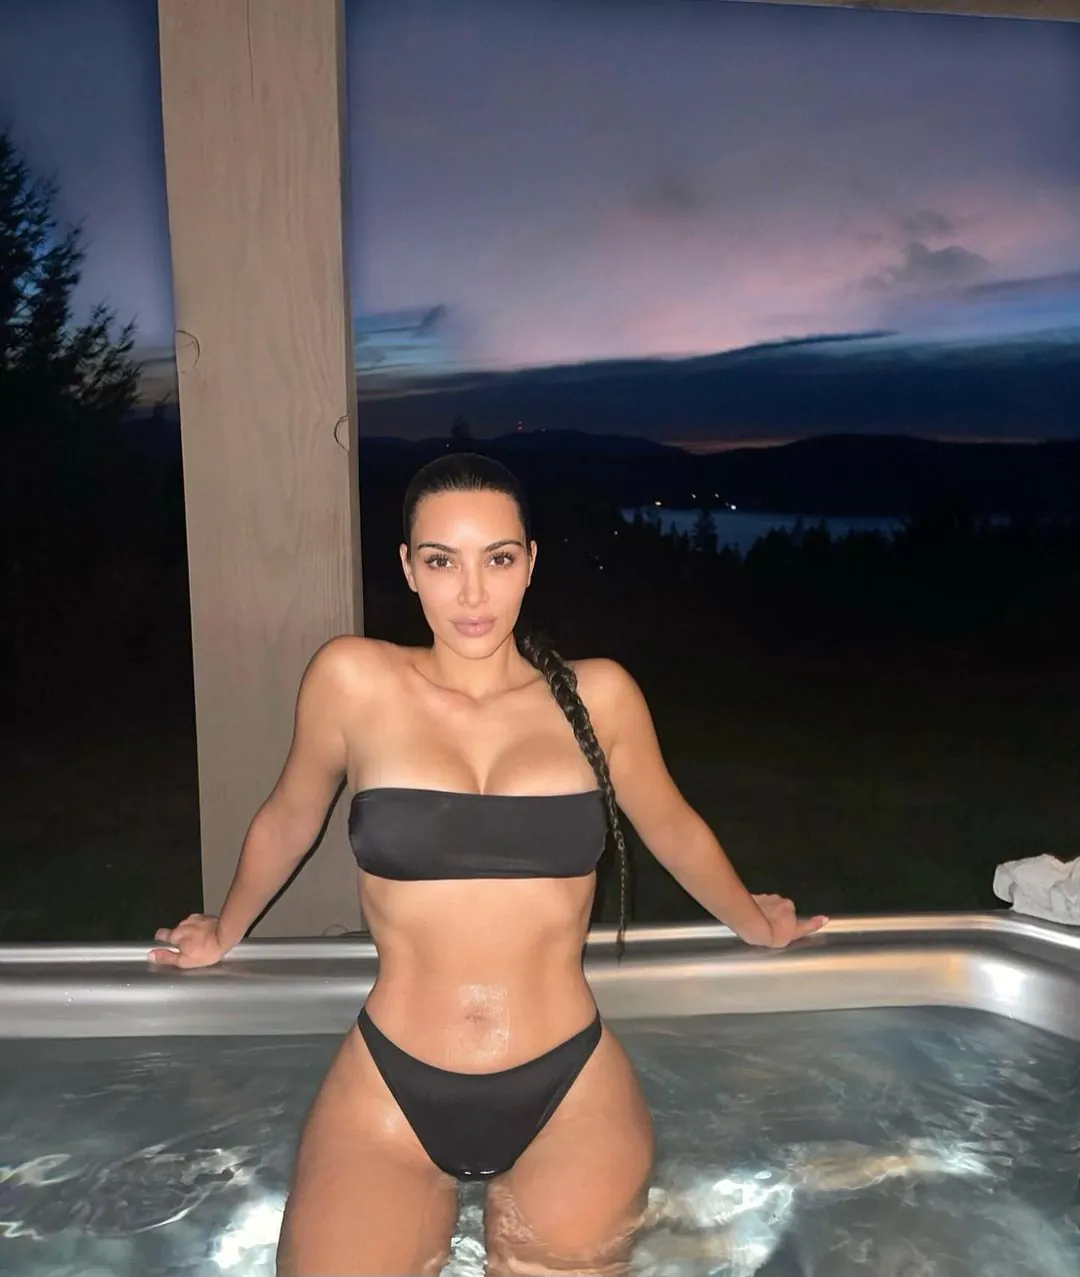 Kim Kardashian’s fame was gained after a sex video went viral